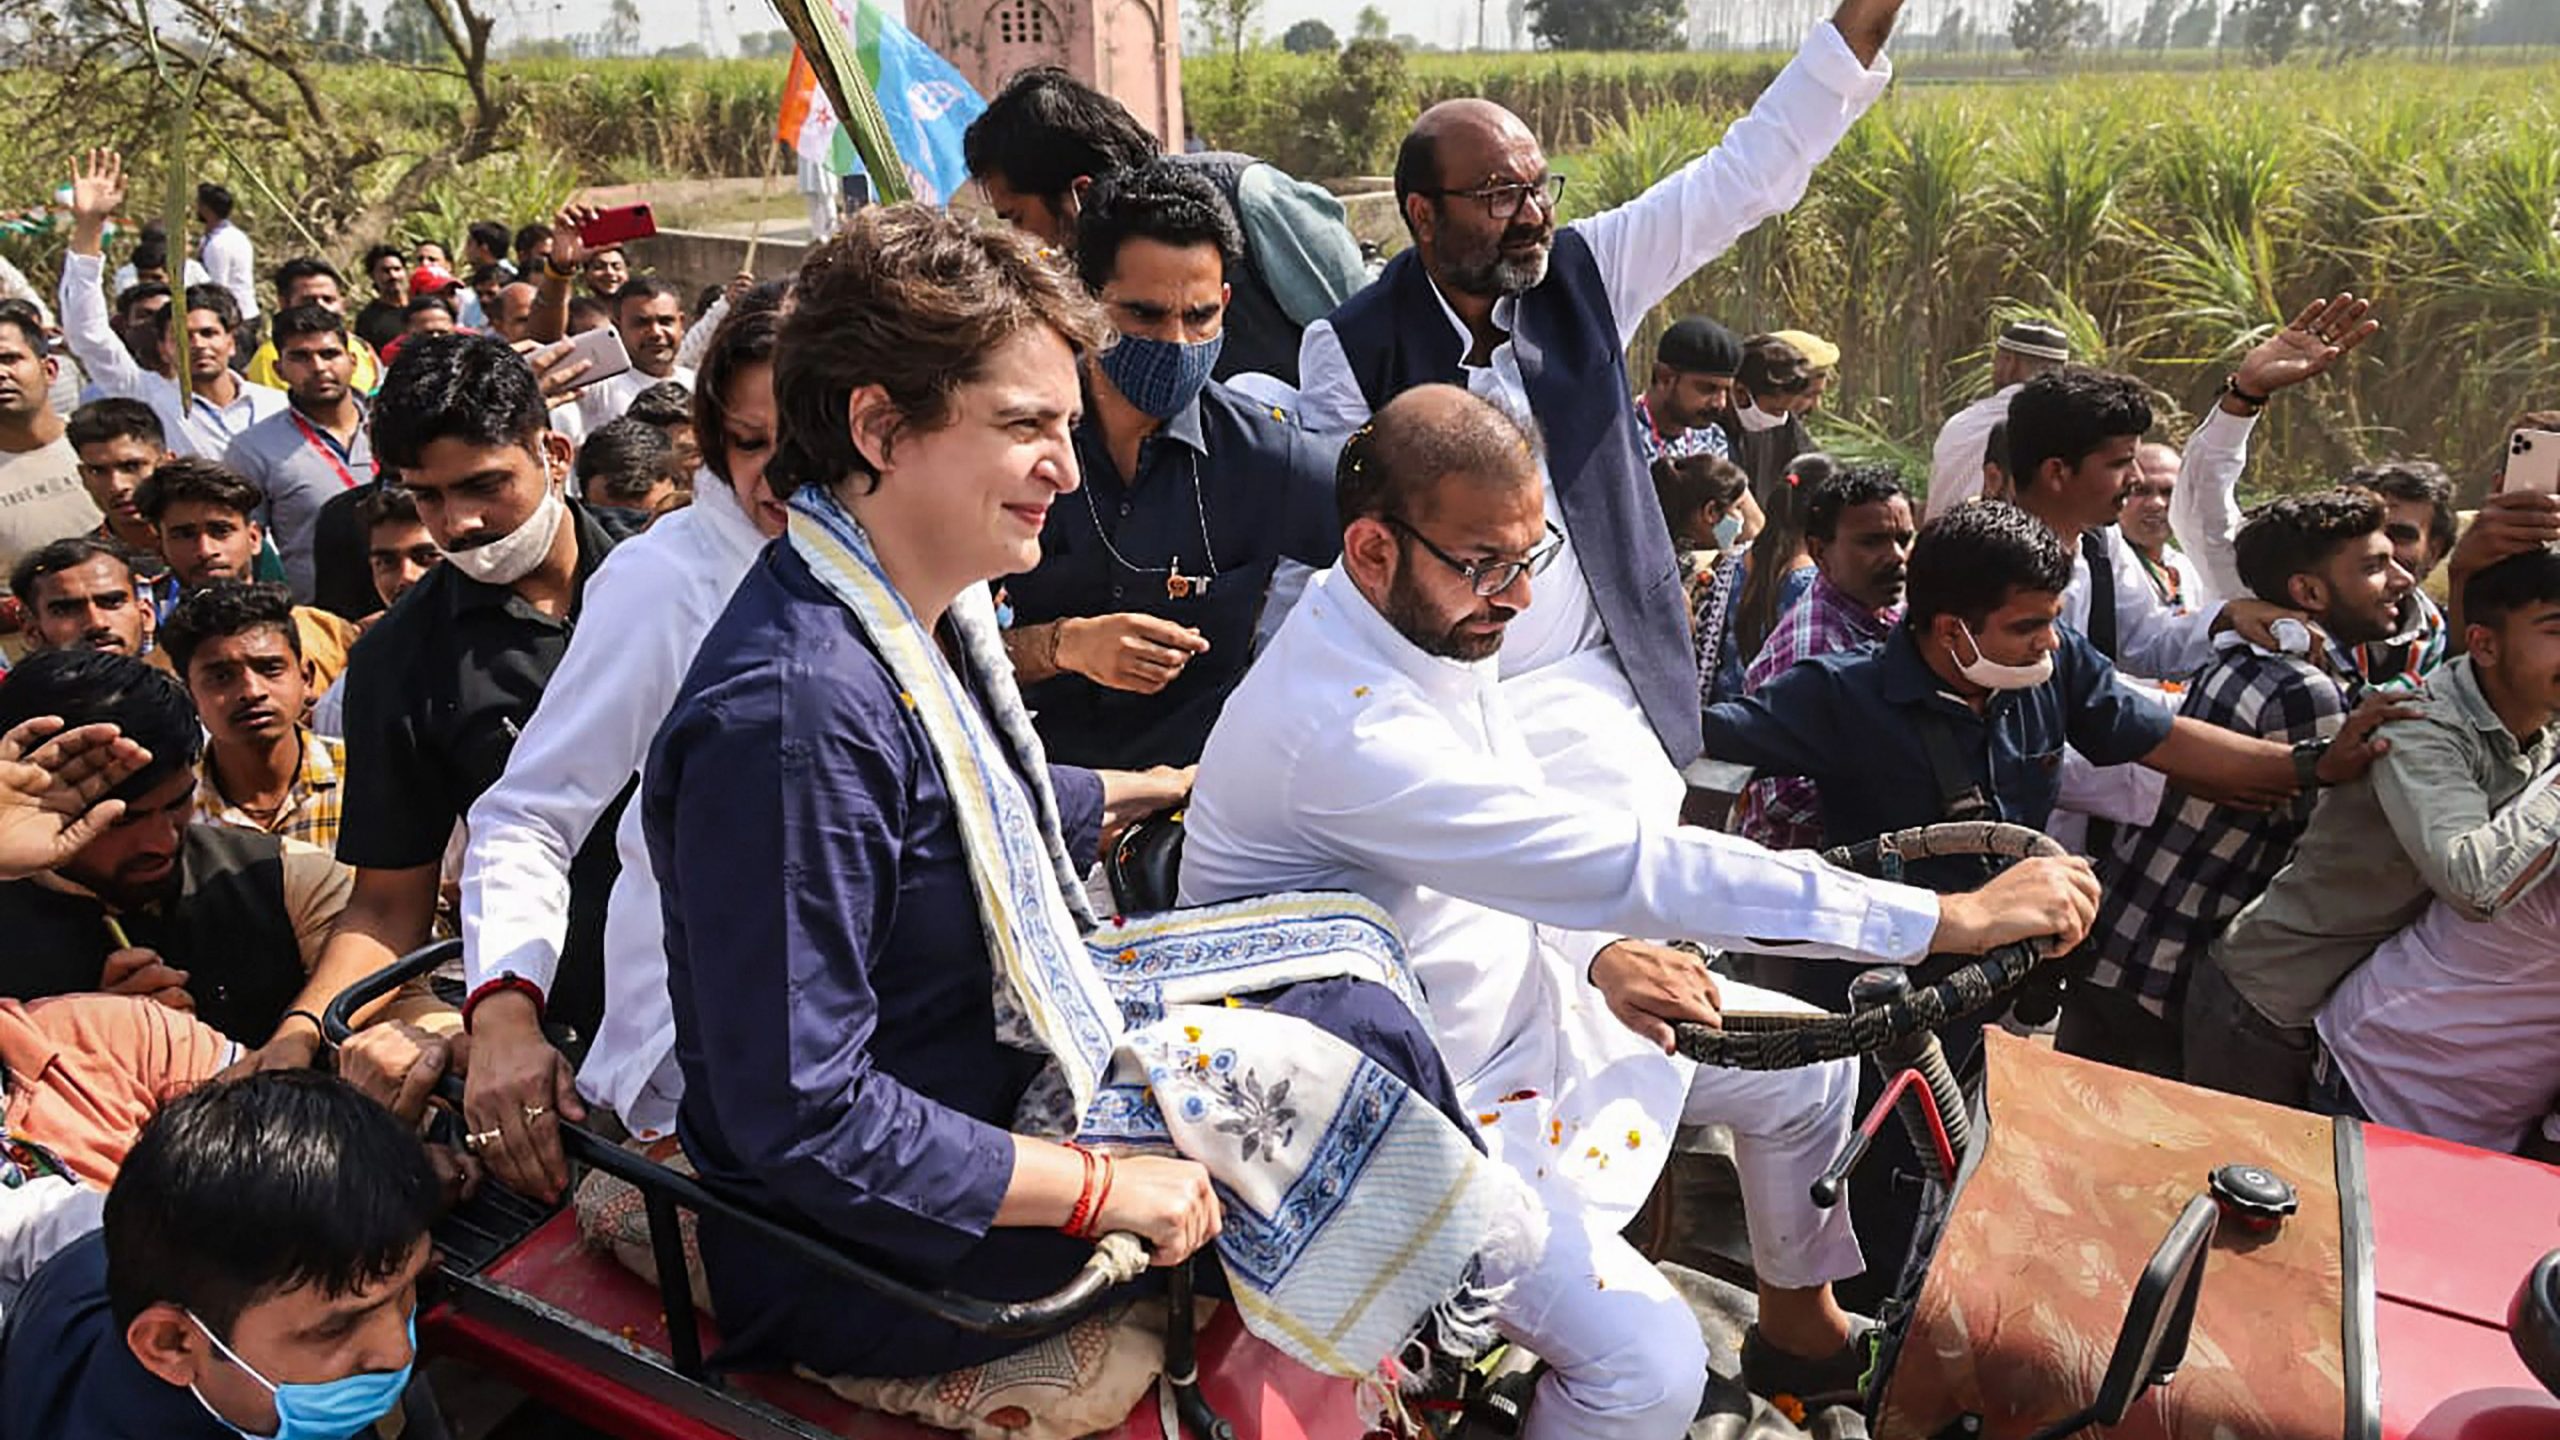 We will fight with you: Congress leader Priyanka Gandhi tells protesting farmers in Meerut